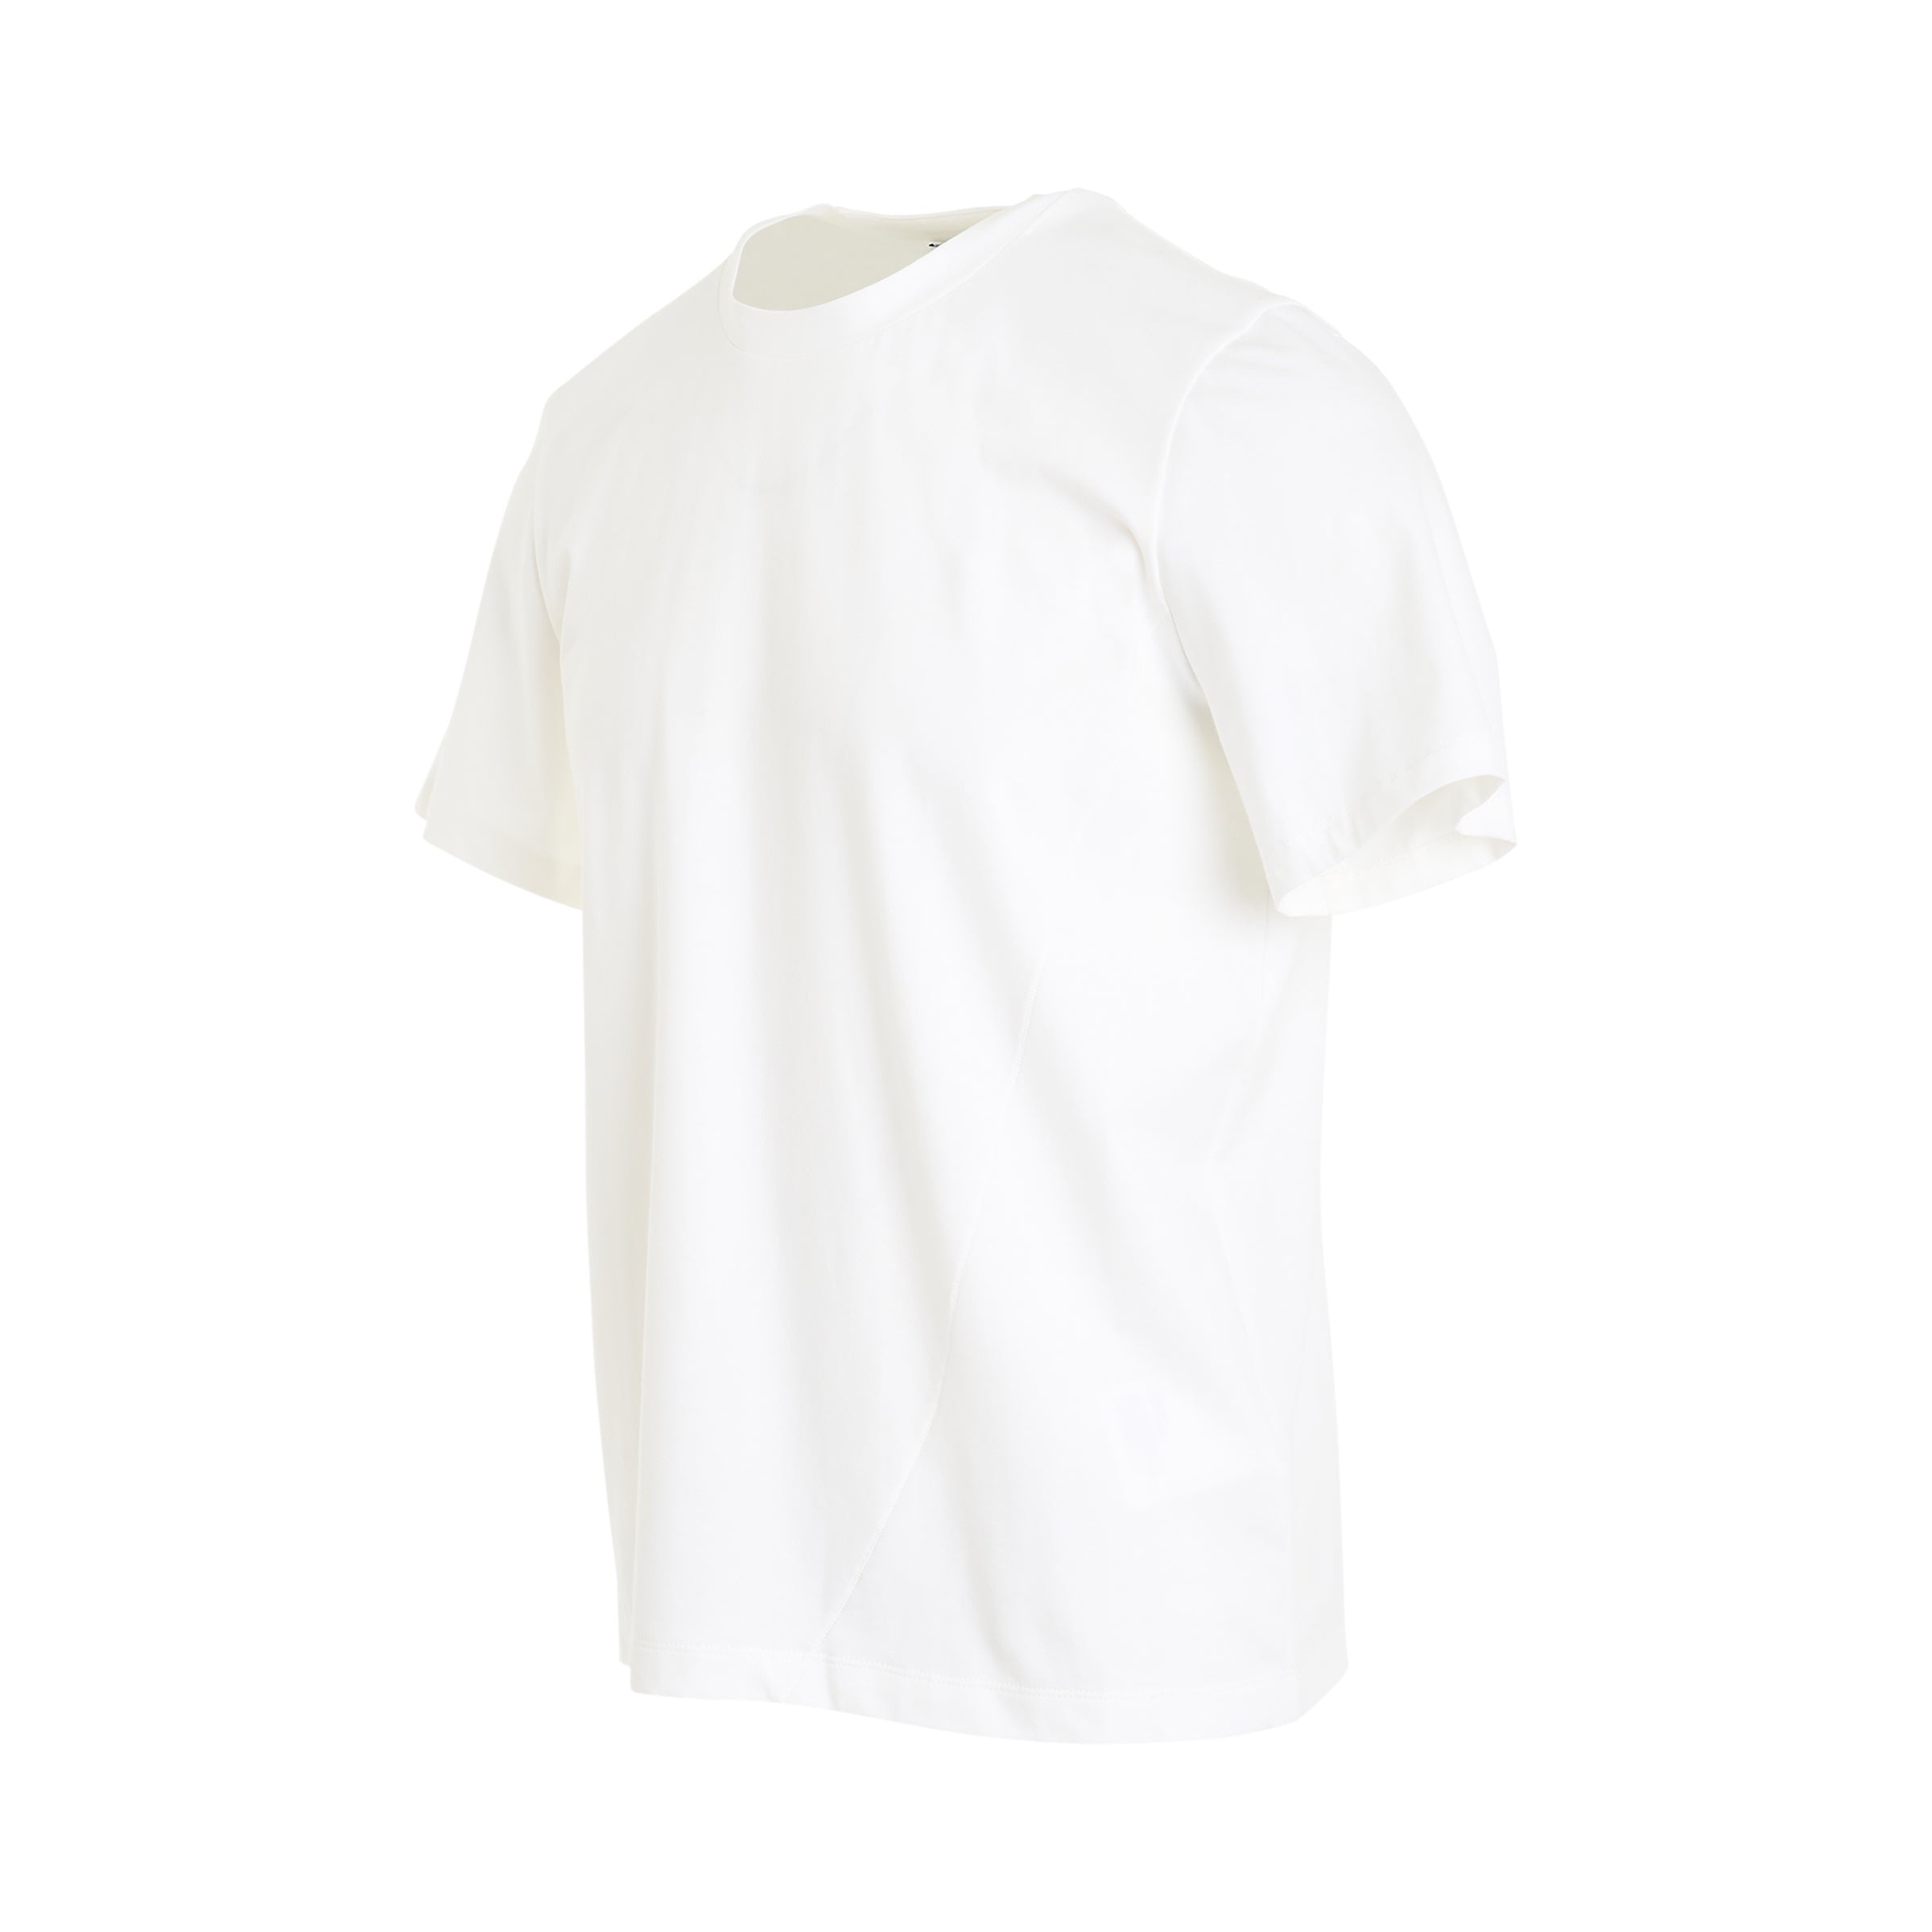 6.0 T-Shirt (Right) in White - 2